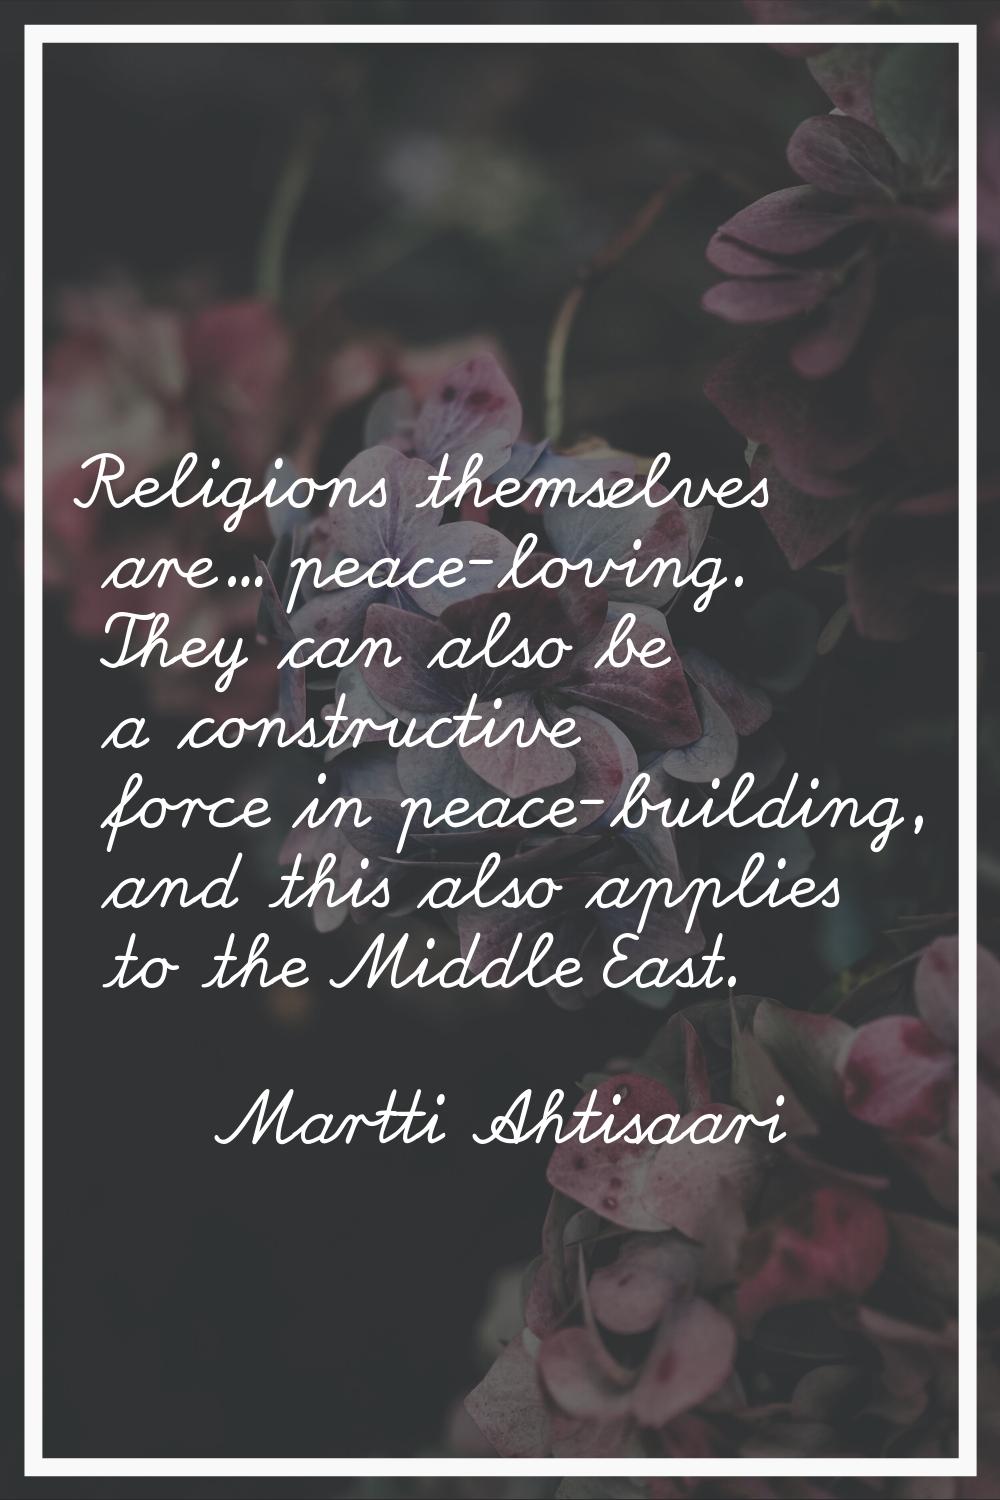 Religions themselves are... peace-loving. They can also be a constructive force in peace-building, 